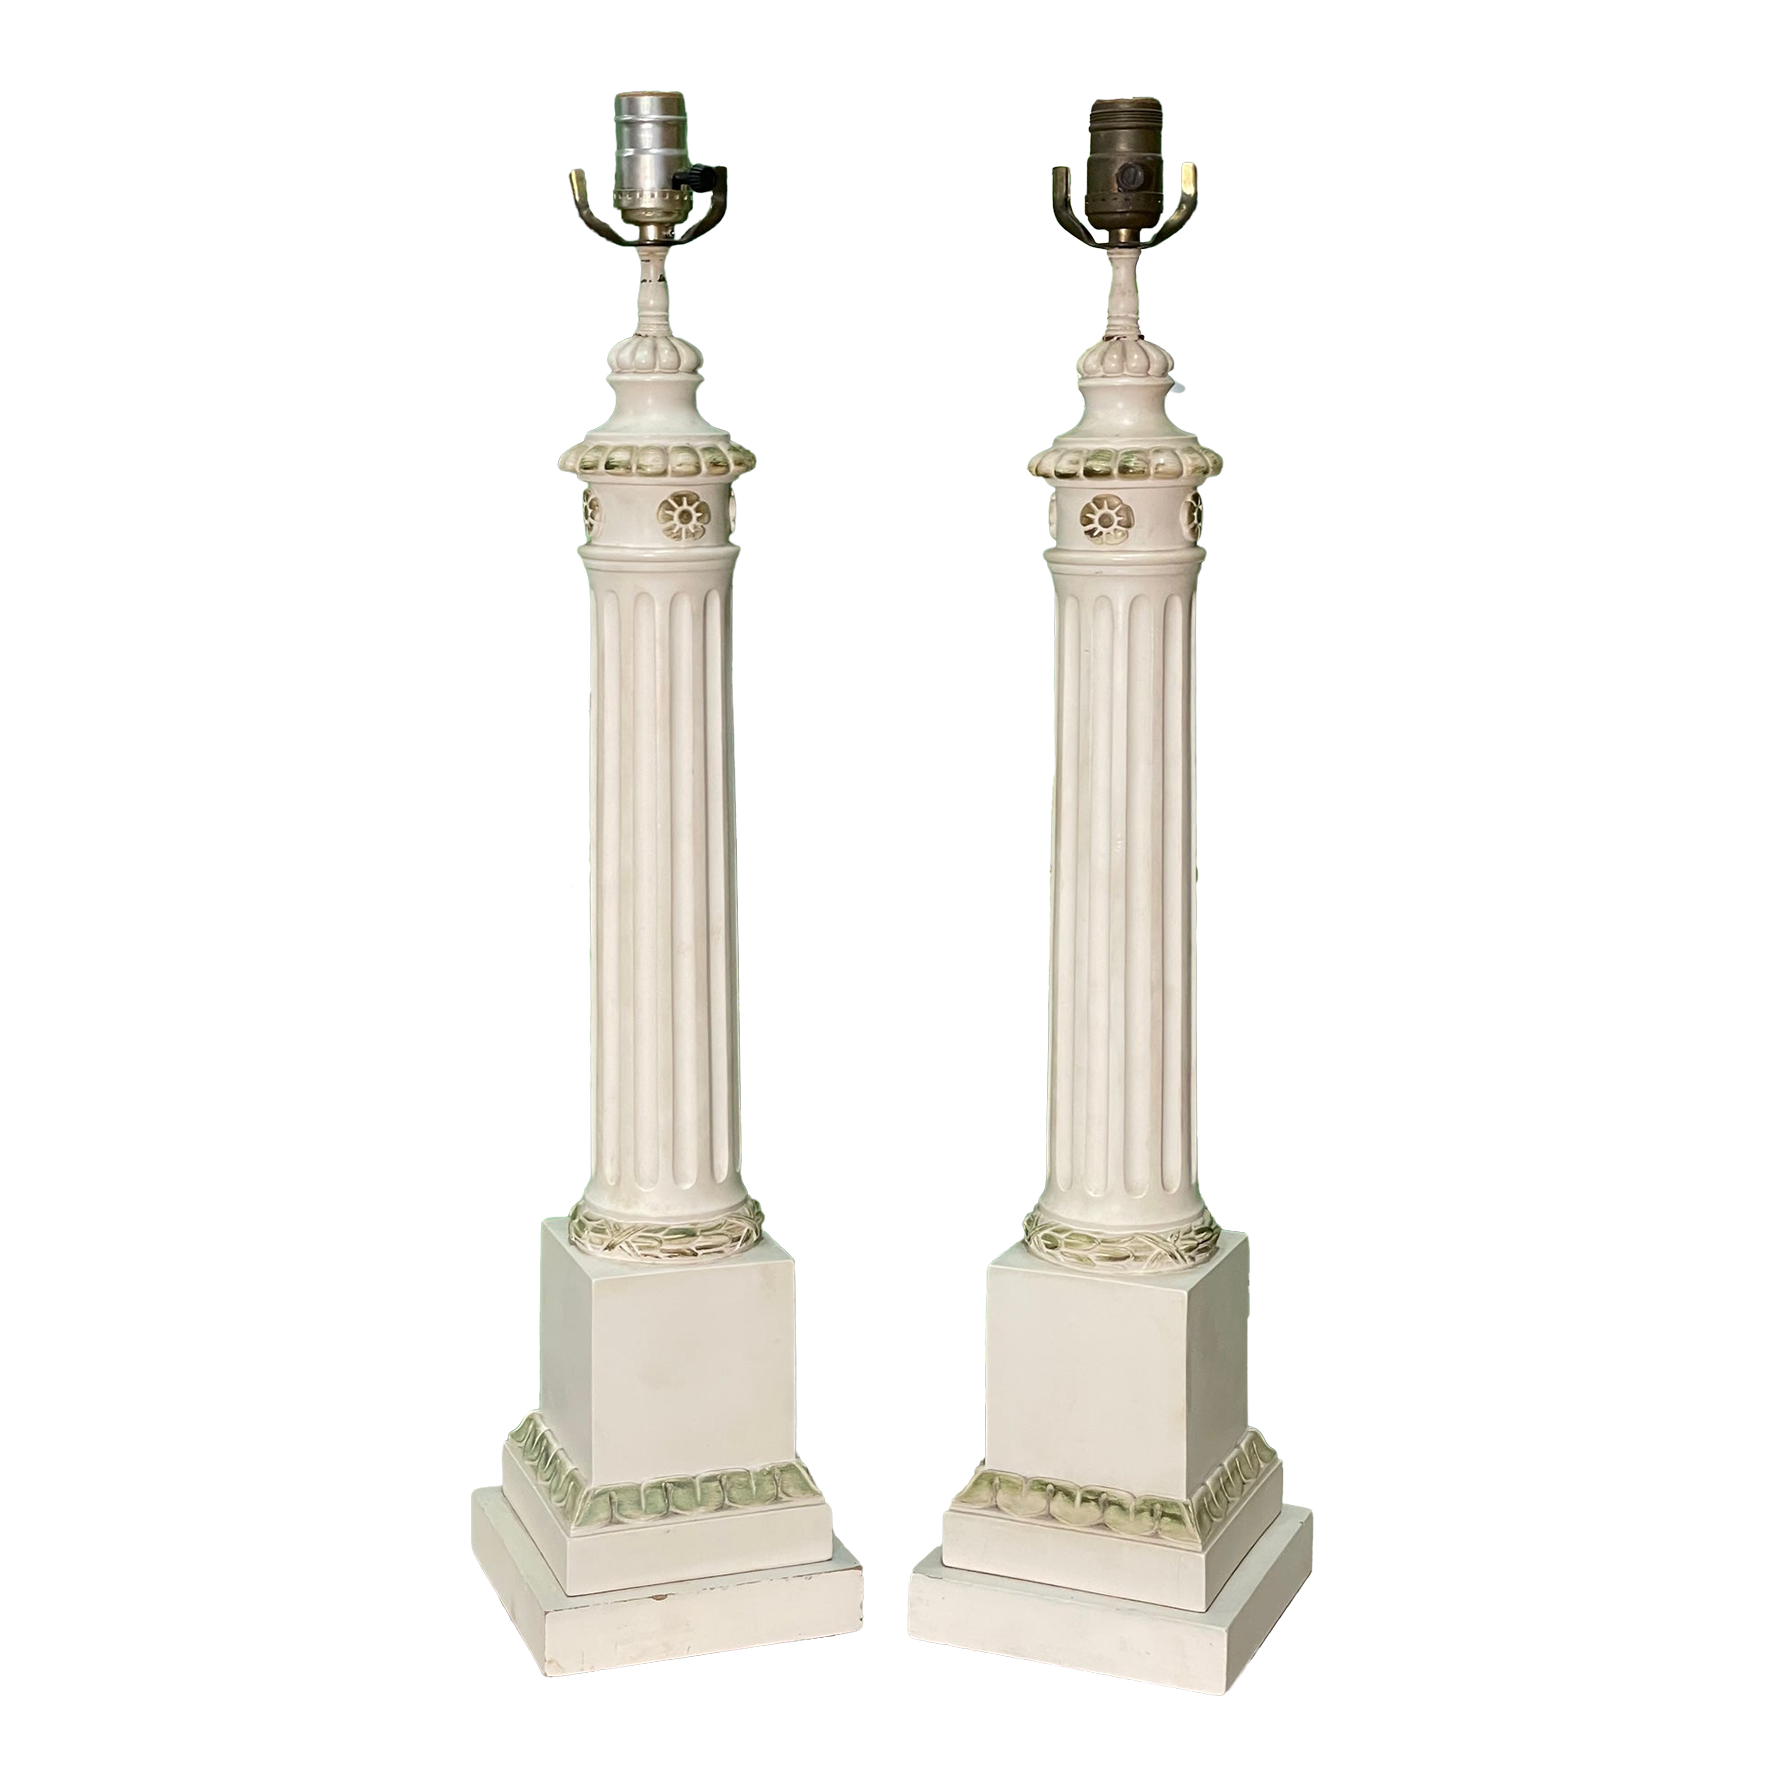 Vintage Neoclassical Column Table Lamps by Chapman